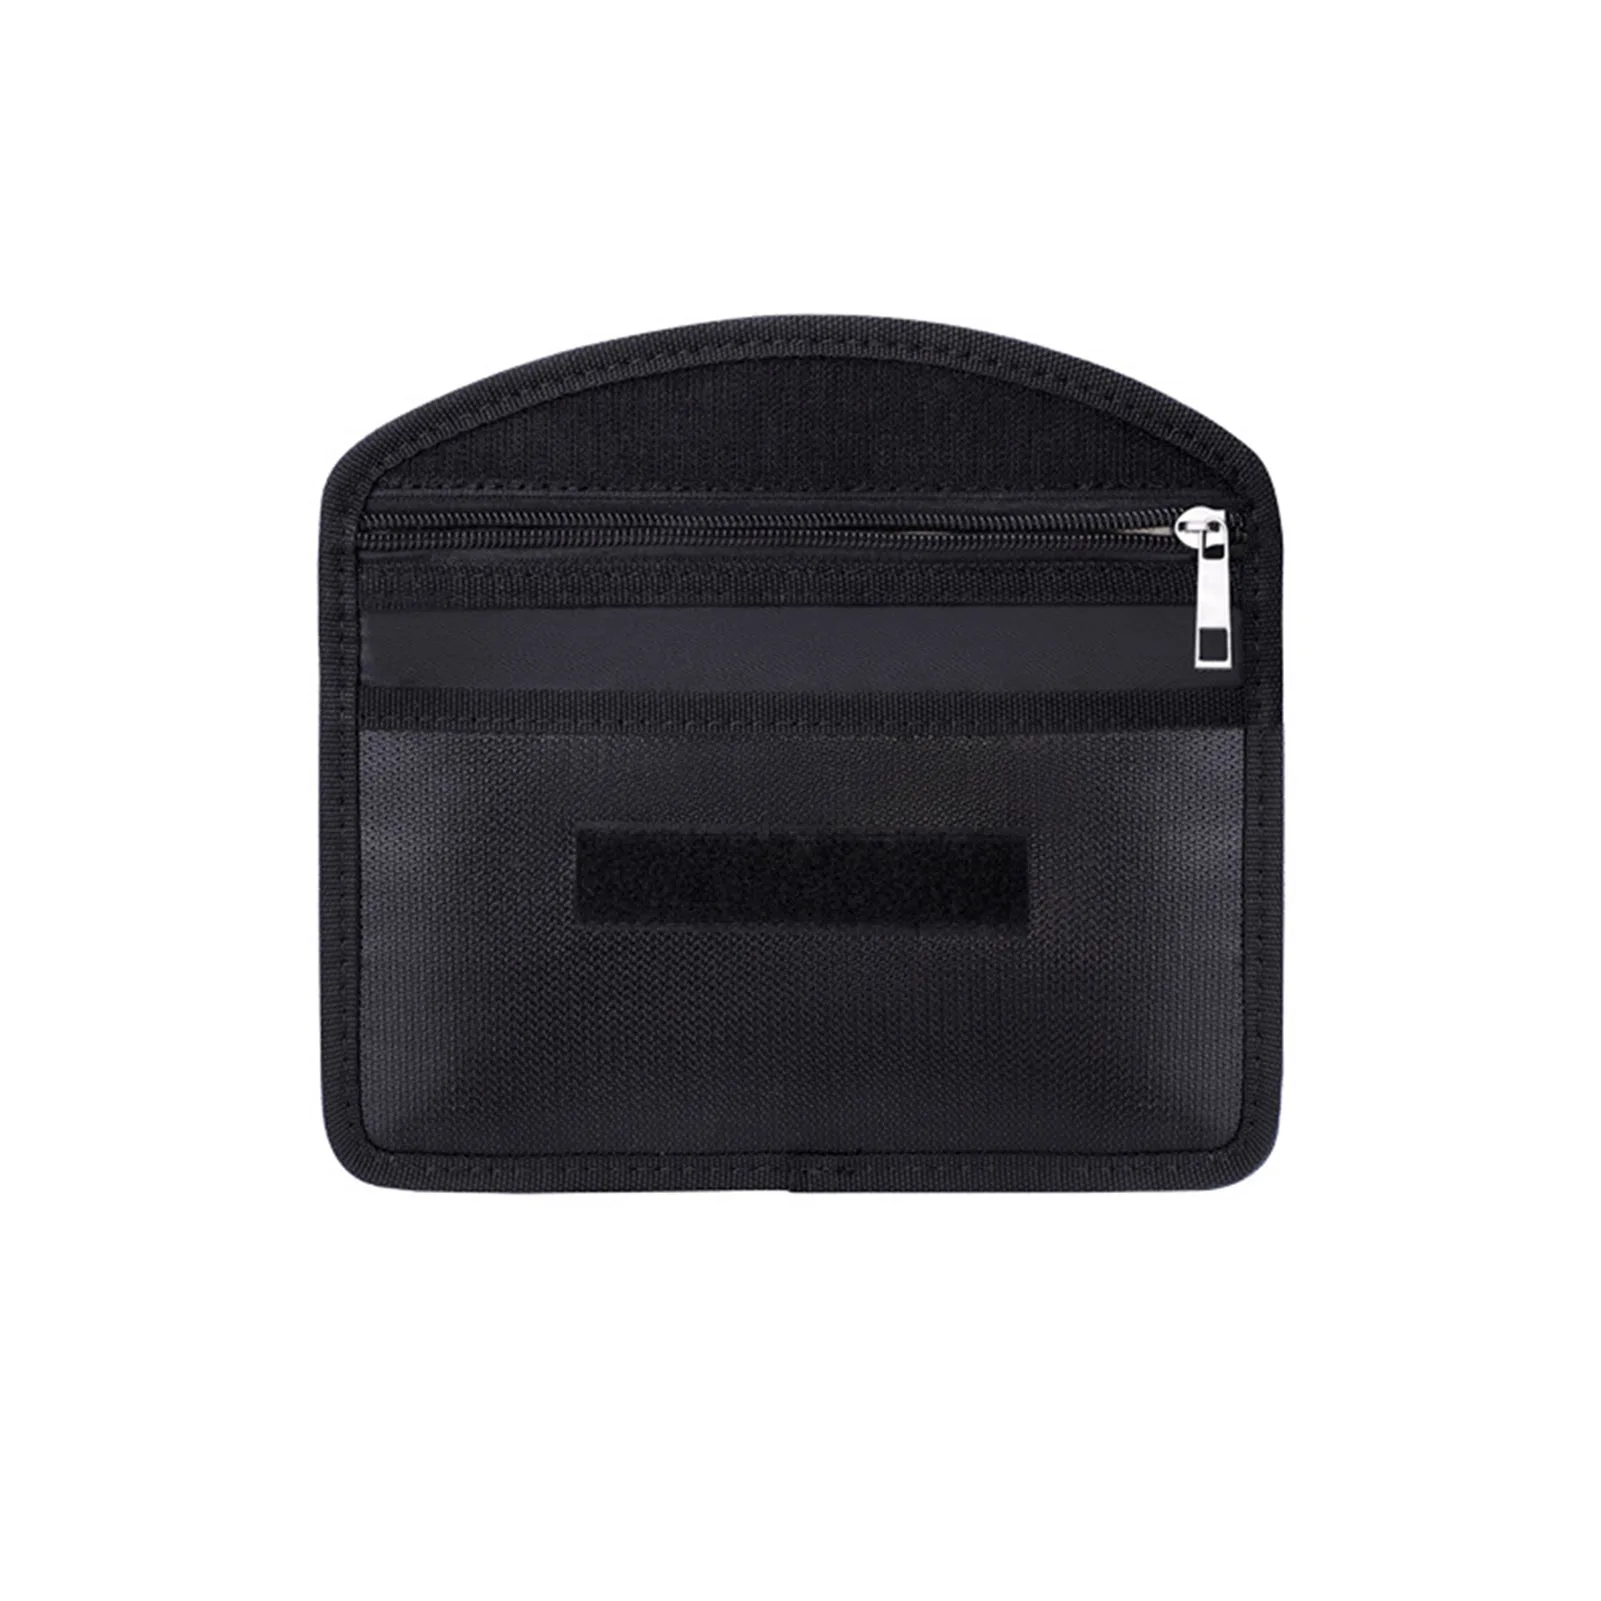 

Fireproof Document Bag Waterproof Money Bags Safe Storage Pouch With Double Layer Cash File Envelope Holder For Home Office